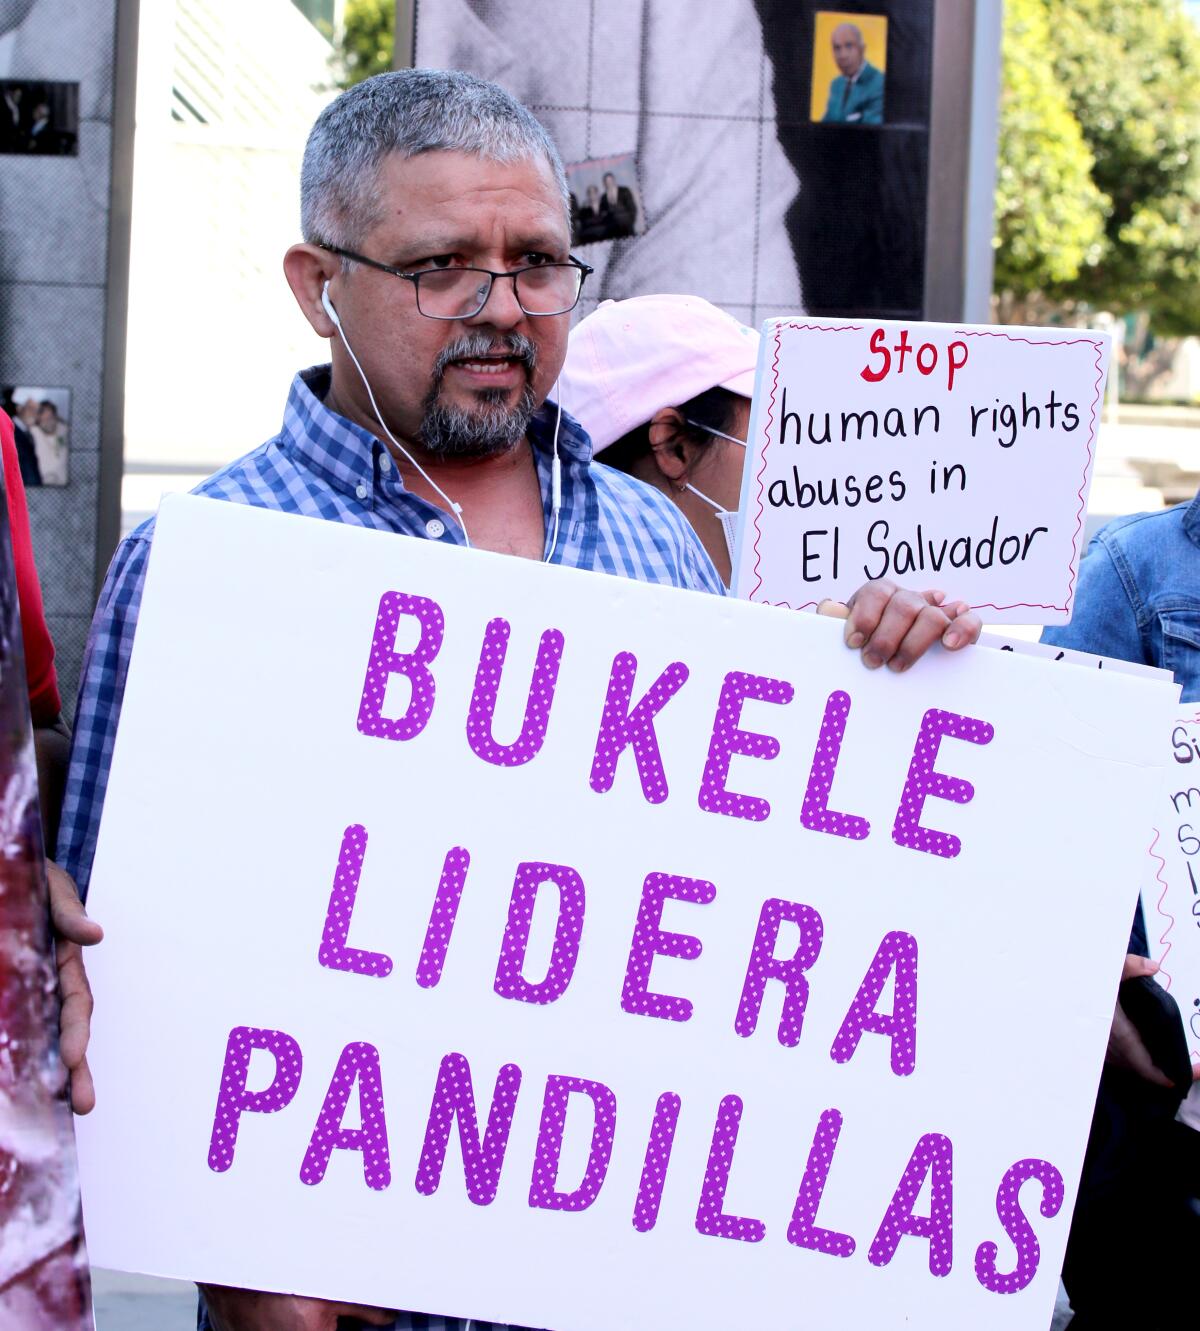 A protester holds a sign reading "Bukele Lider Pandillas."